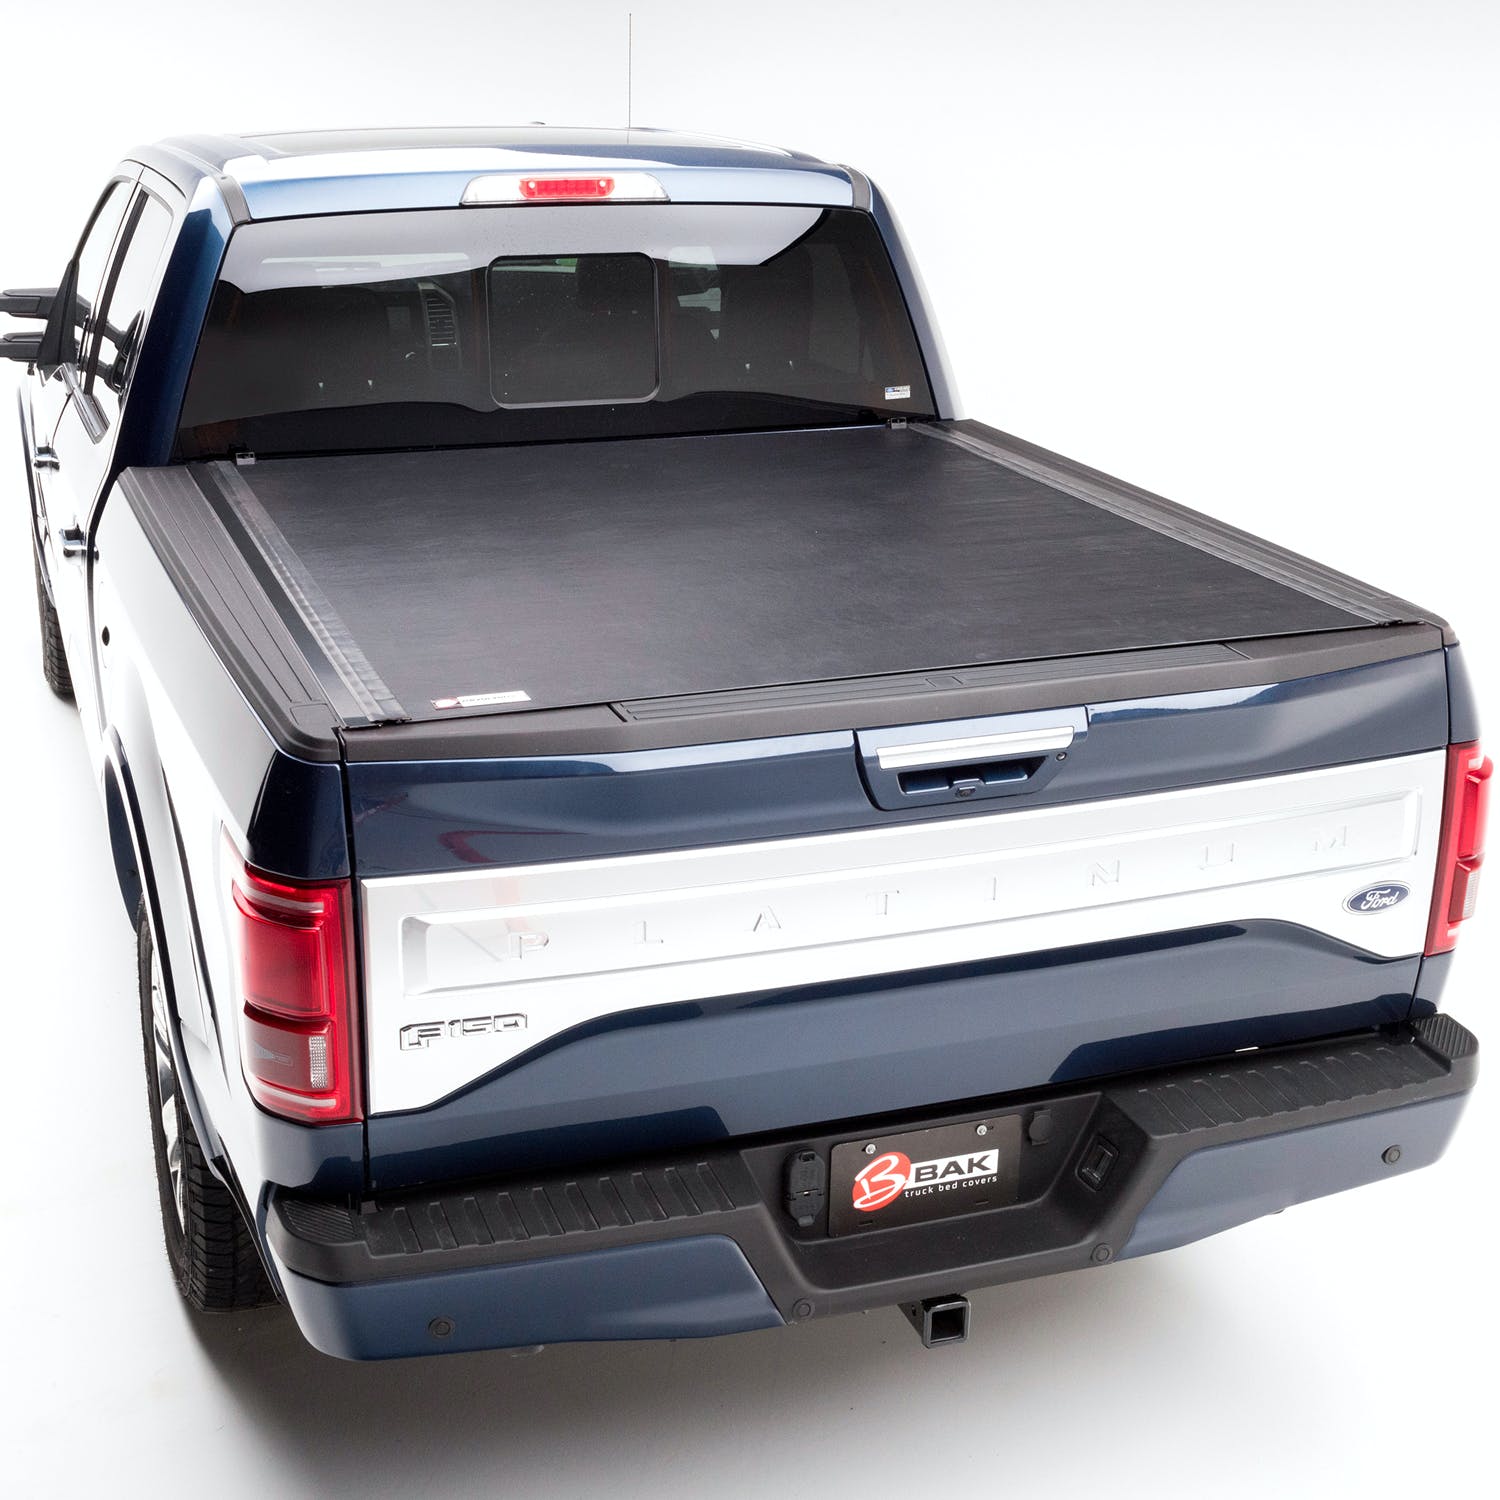 BAK Industries 39307 Revolver X2 Hard Rolling Truck Bed Cover